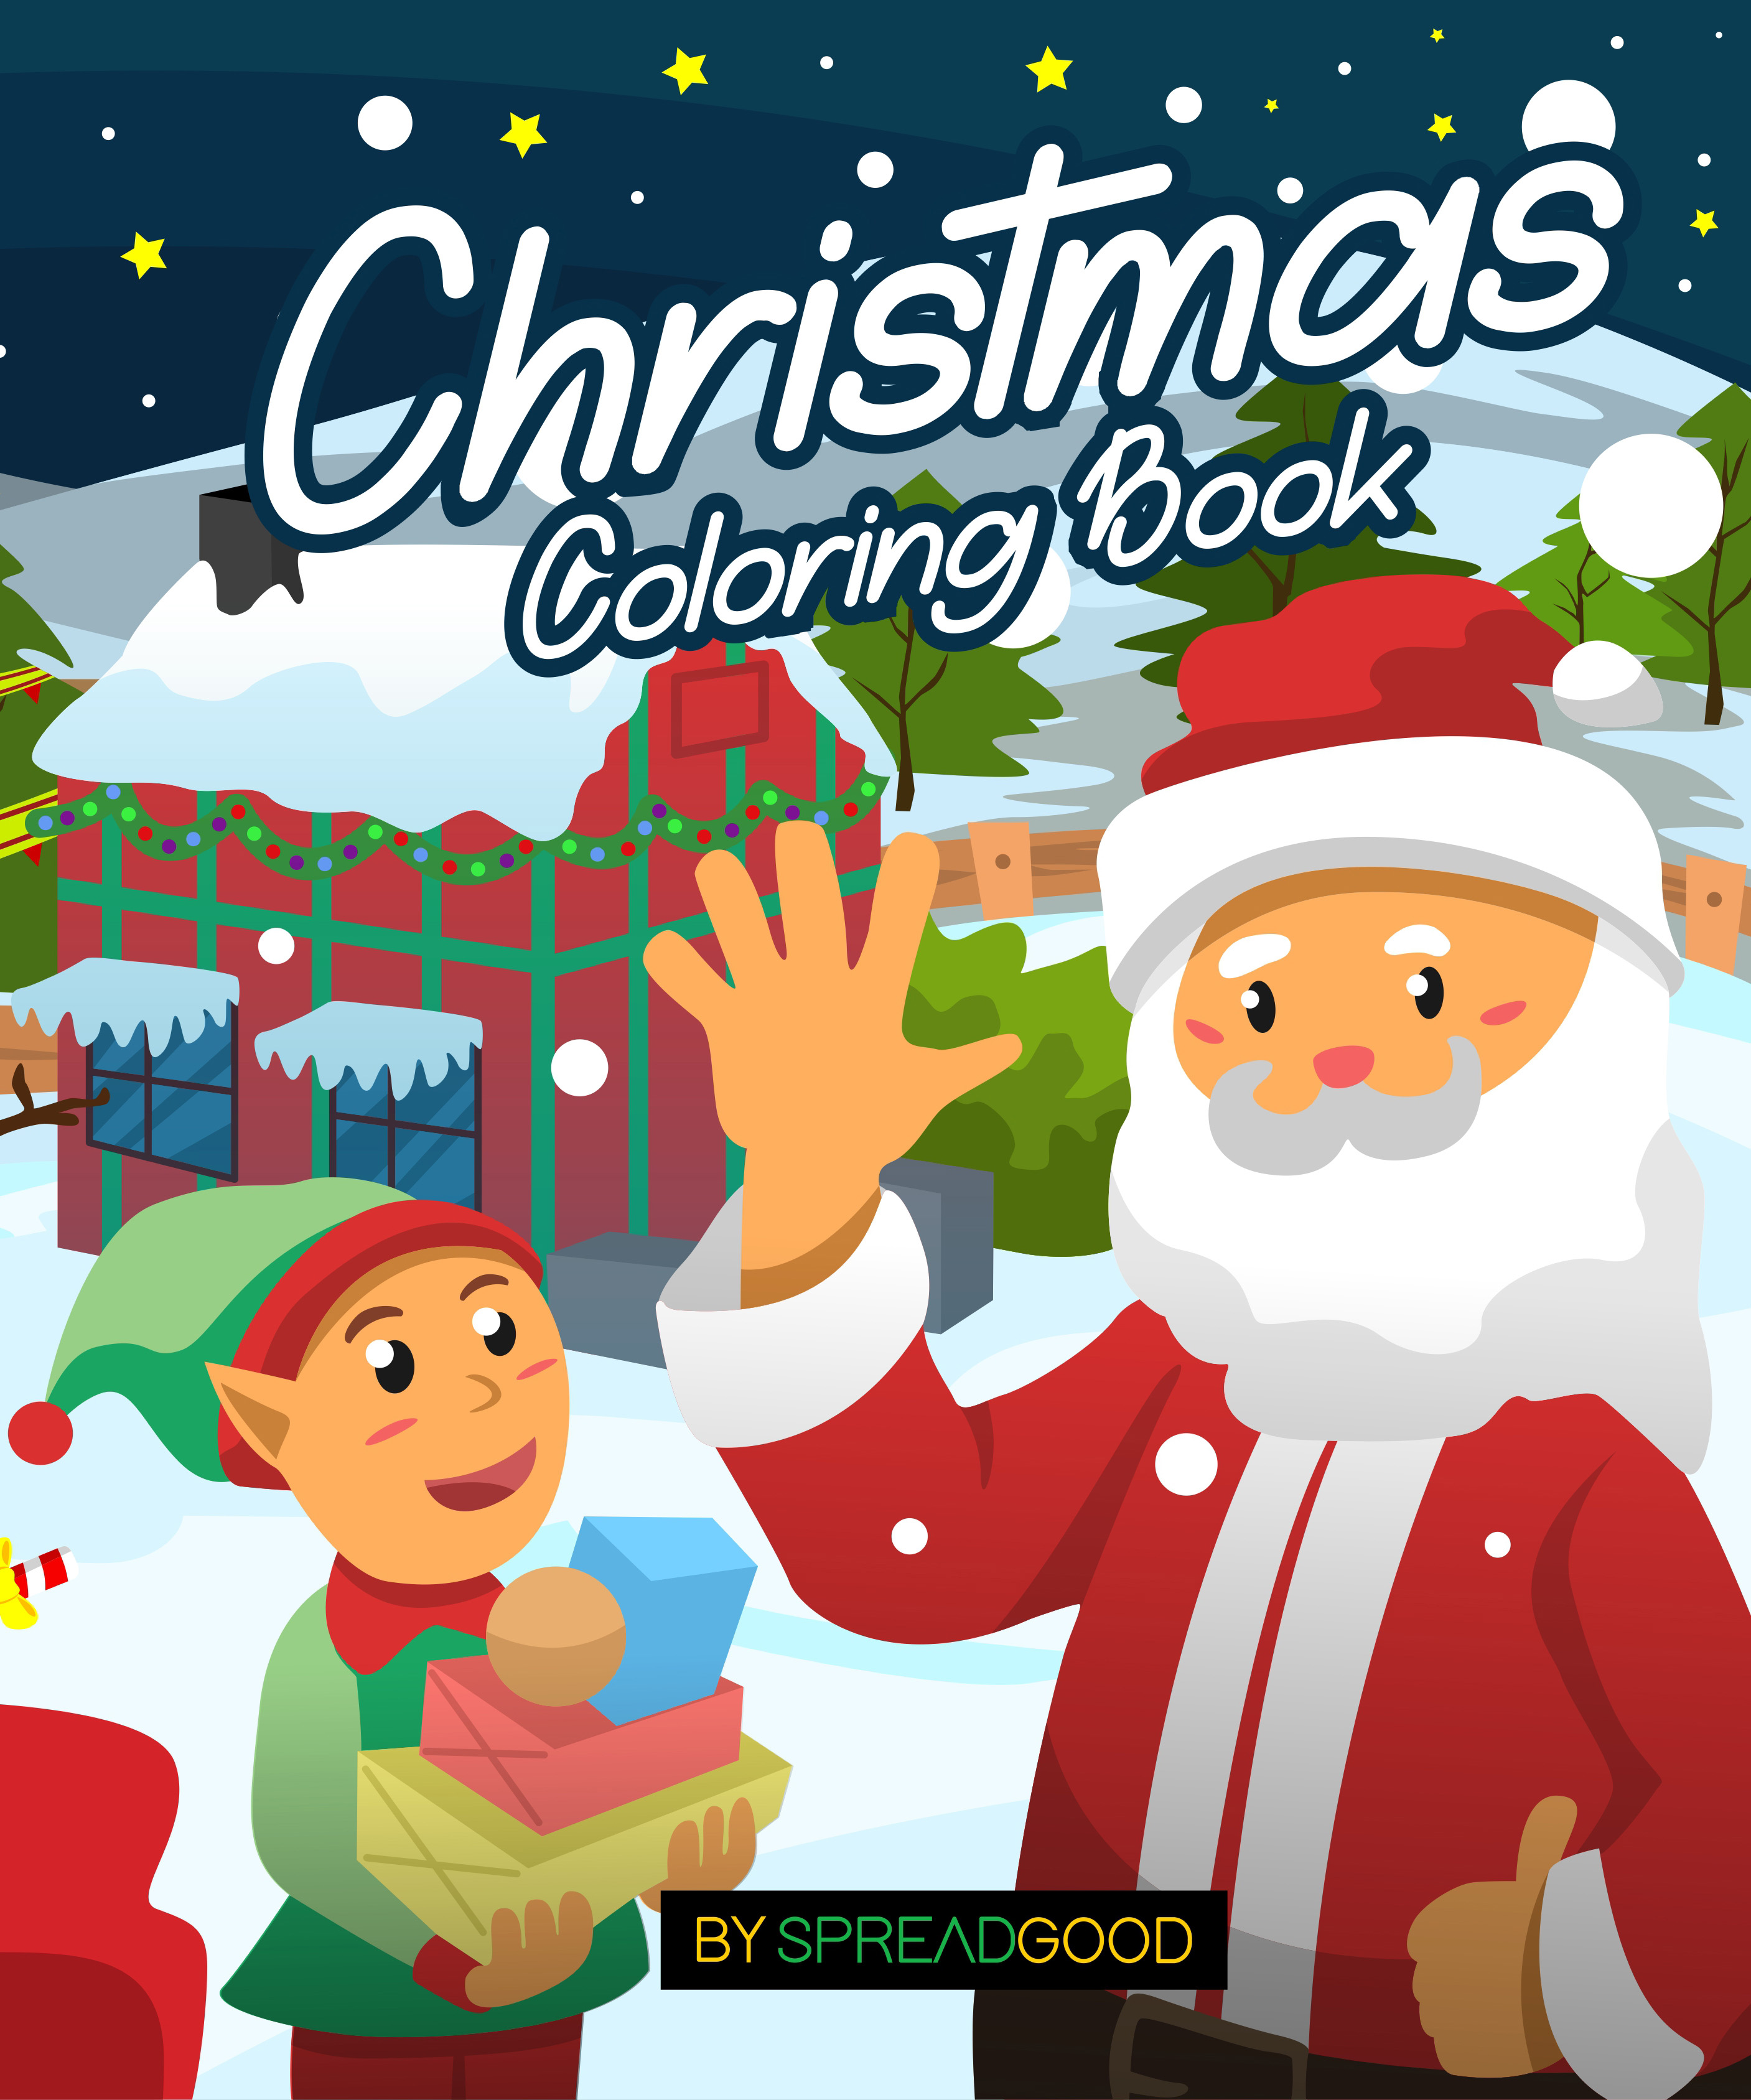 FREE: Spread good Christmas coloring Book: coloring book for kids,boys,girls,ages 2-4,ages 4-8|50 holiday coloring pages with santa,reindeers,christmas … High-Quality Pages by spread good